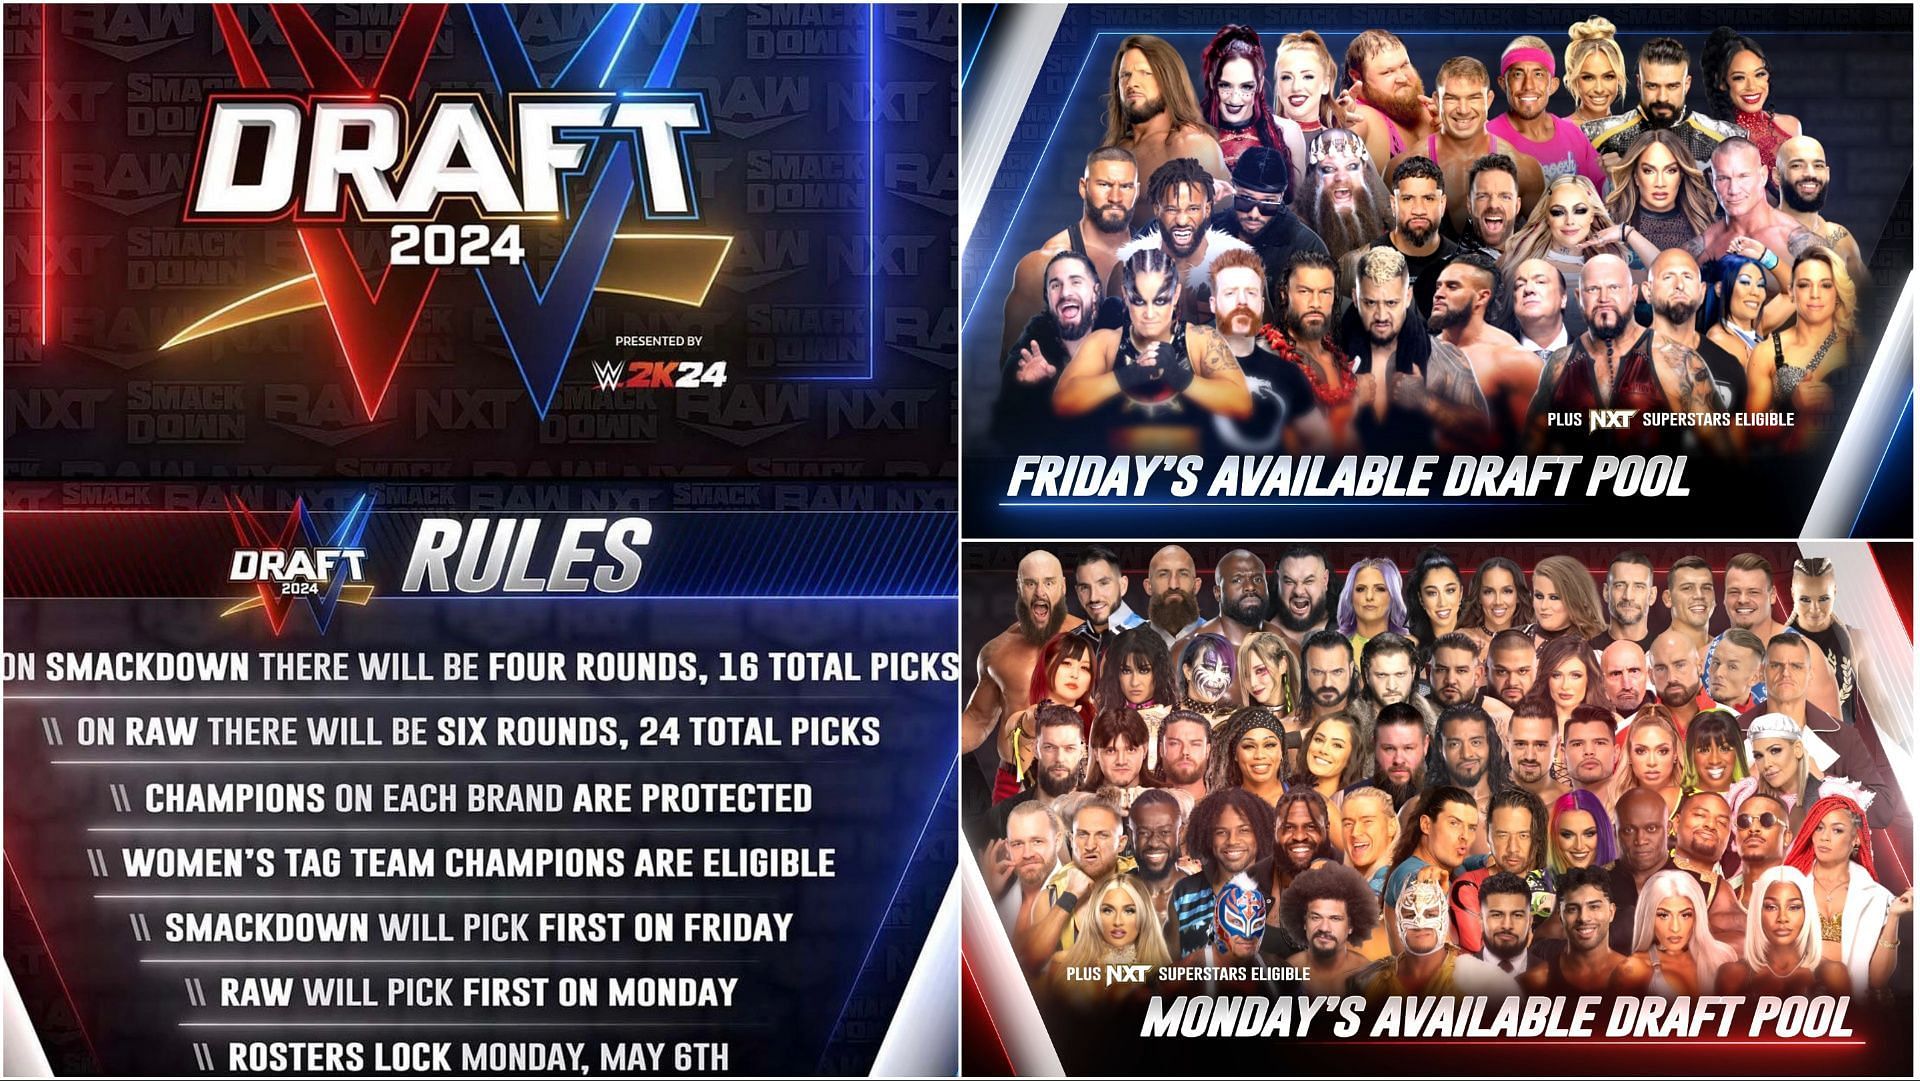 Official promotional graphics for the 2024 WWE Draft - talent pools and updated rules